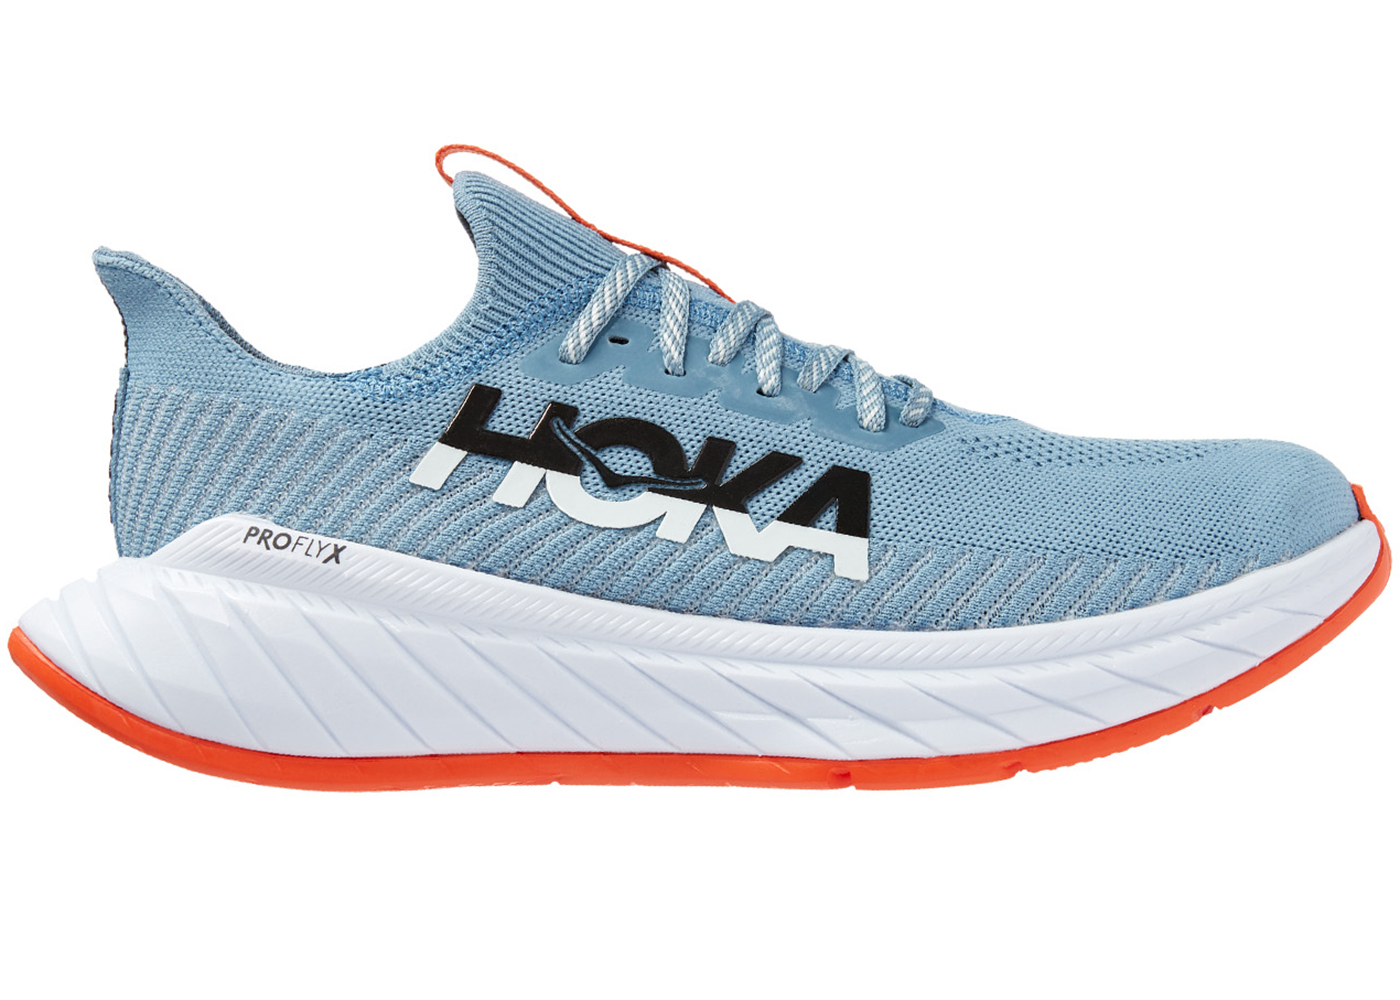 Hoka One One Carbon X 3 Mountain Spring Puffin's Bill Men's